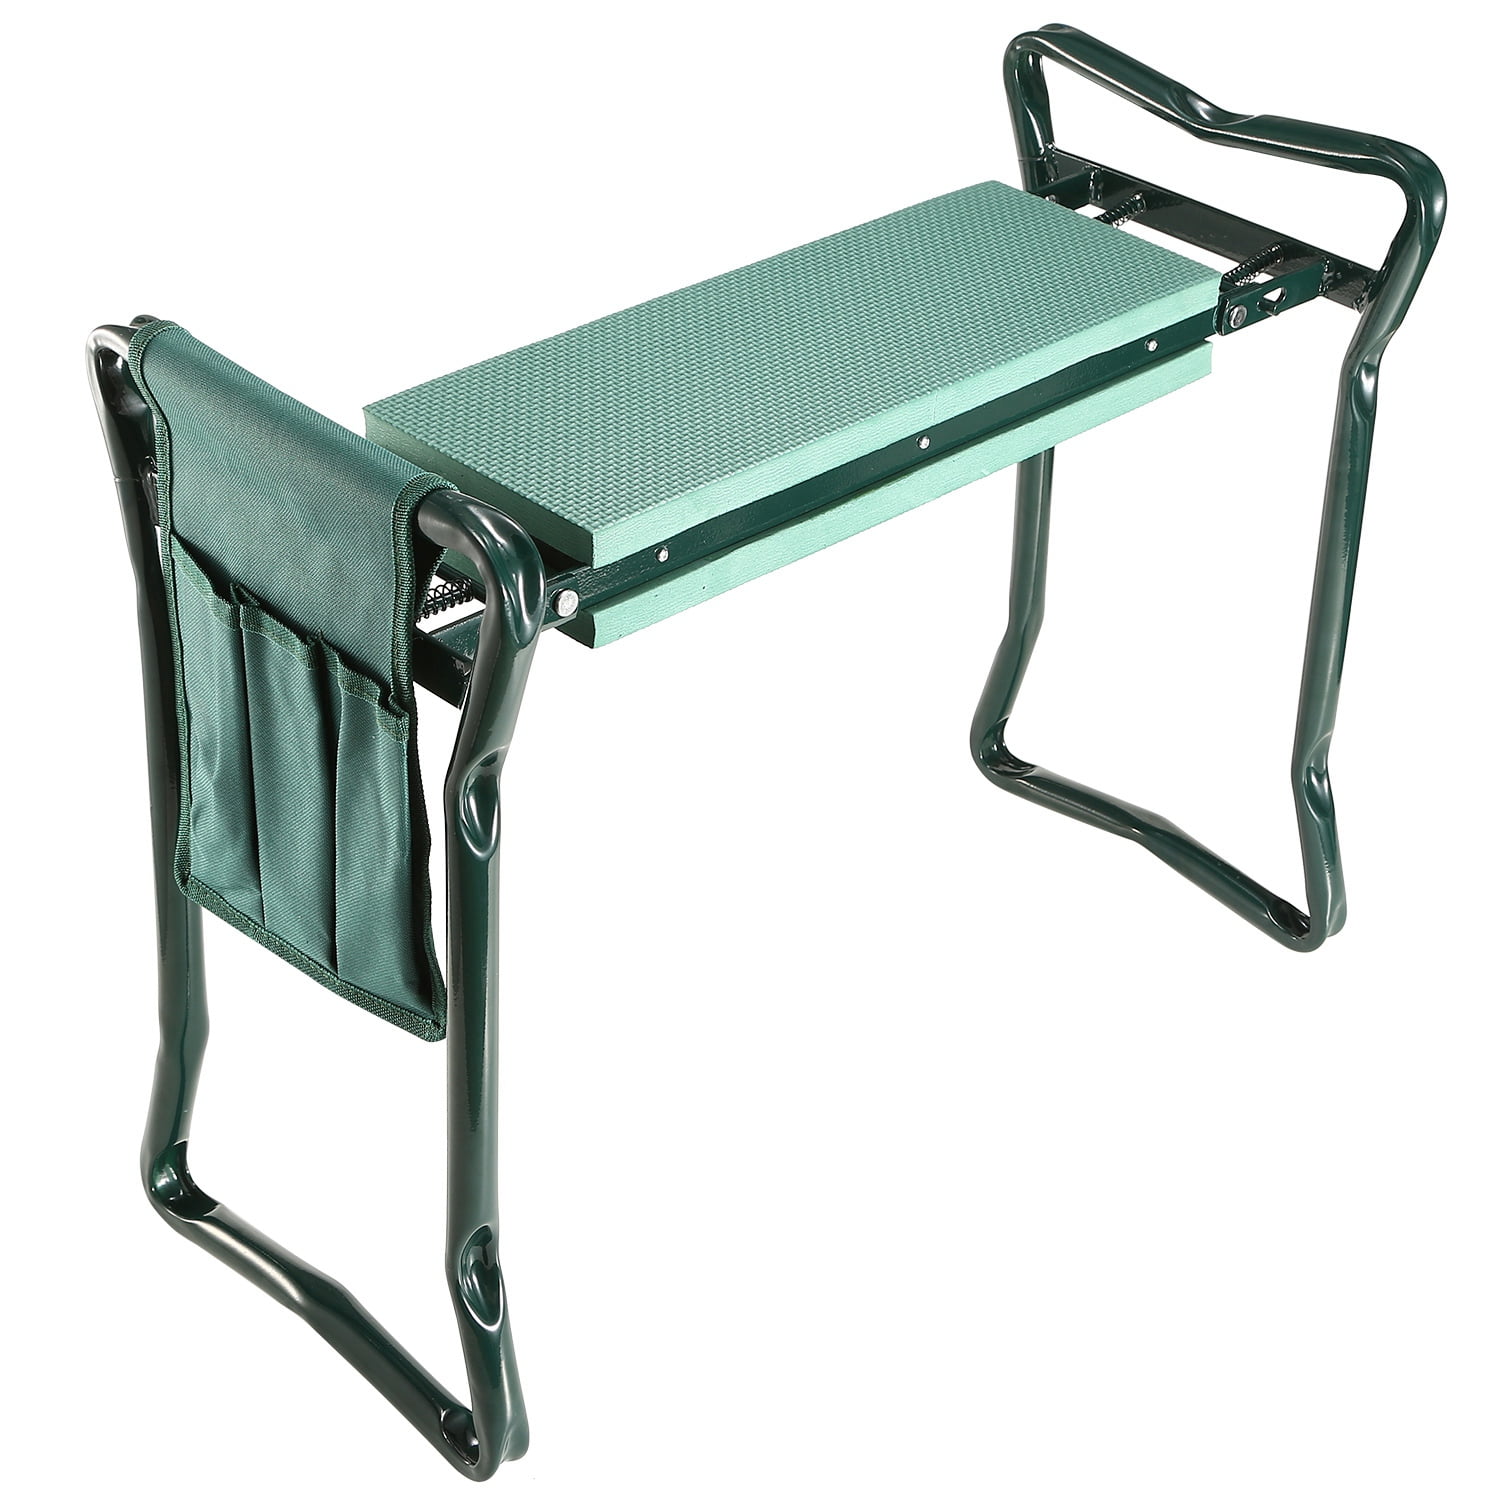 Garden Kneeler Seat Fold Portable Bench Kneeling Pad and Tool Pouch Outdoors 